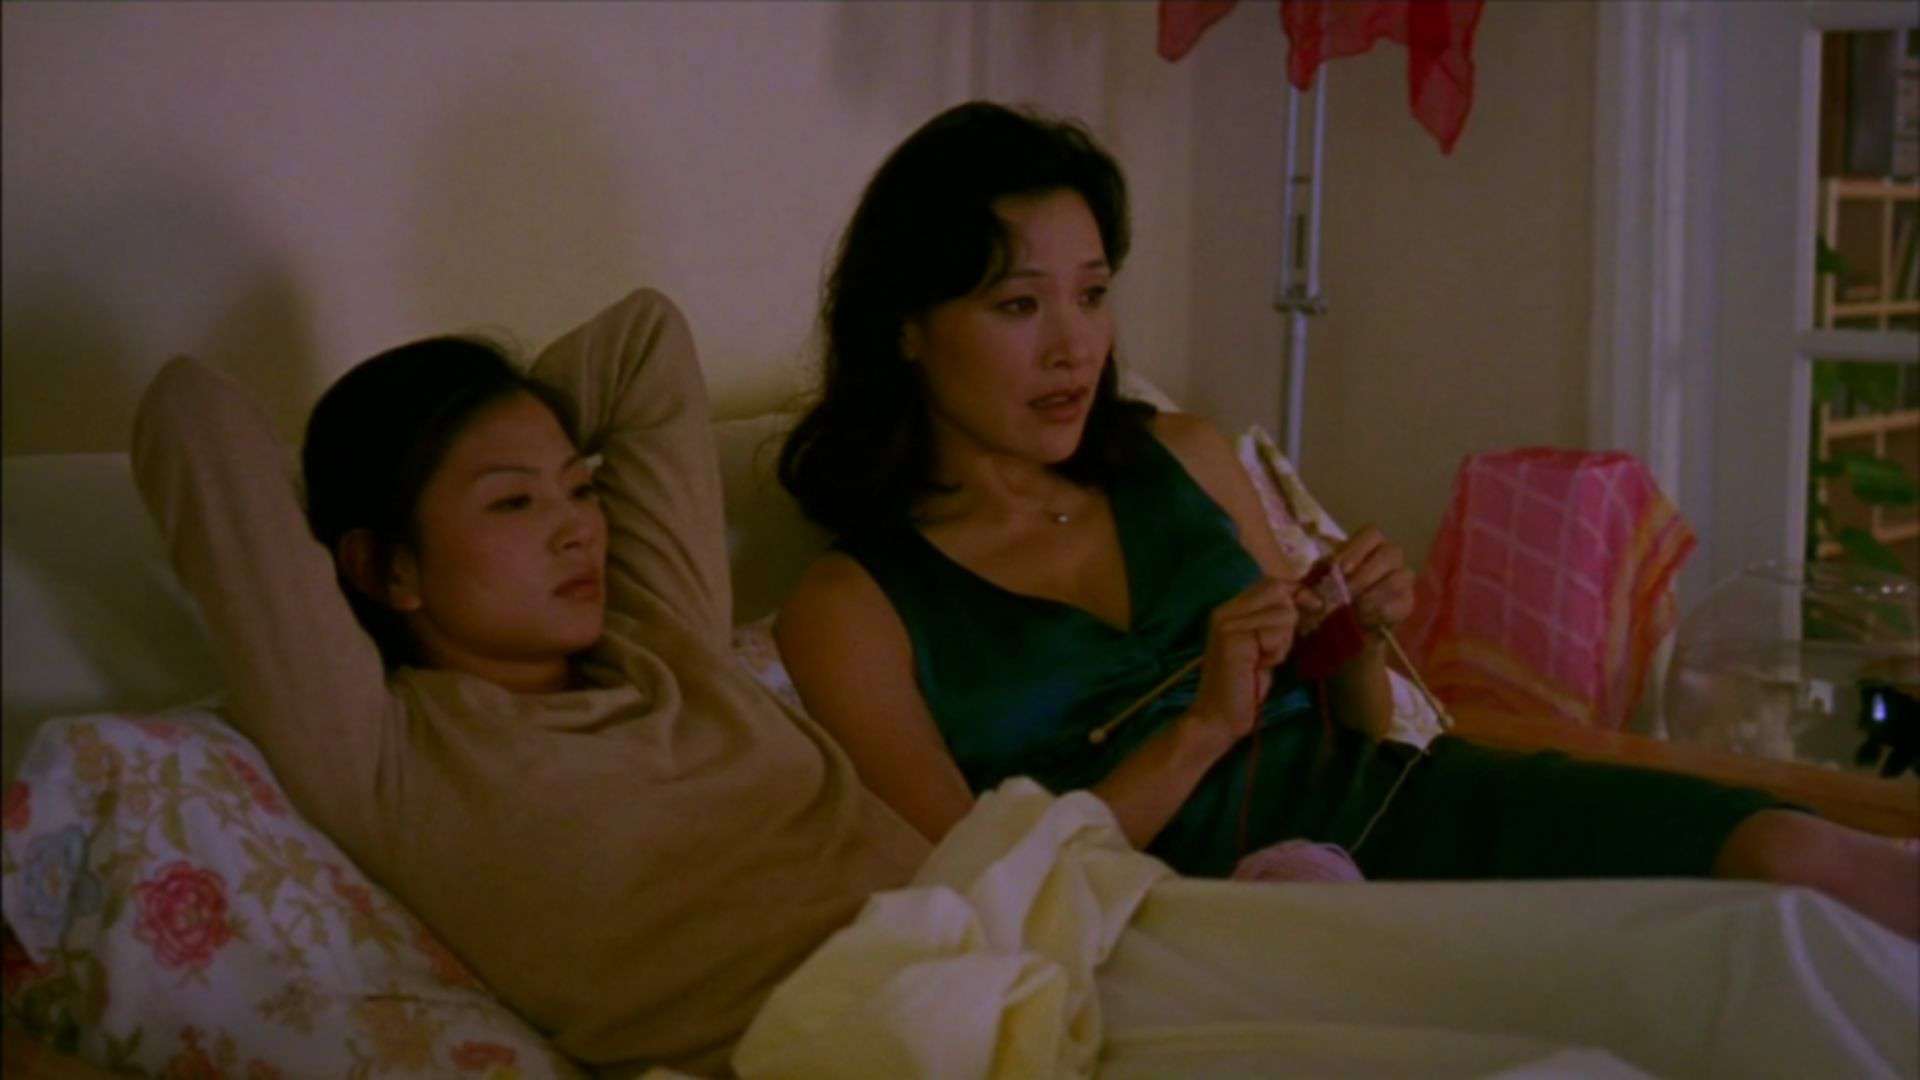 A woman knits in bed next to another woman in this image from Destination Films.